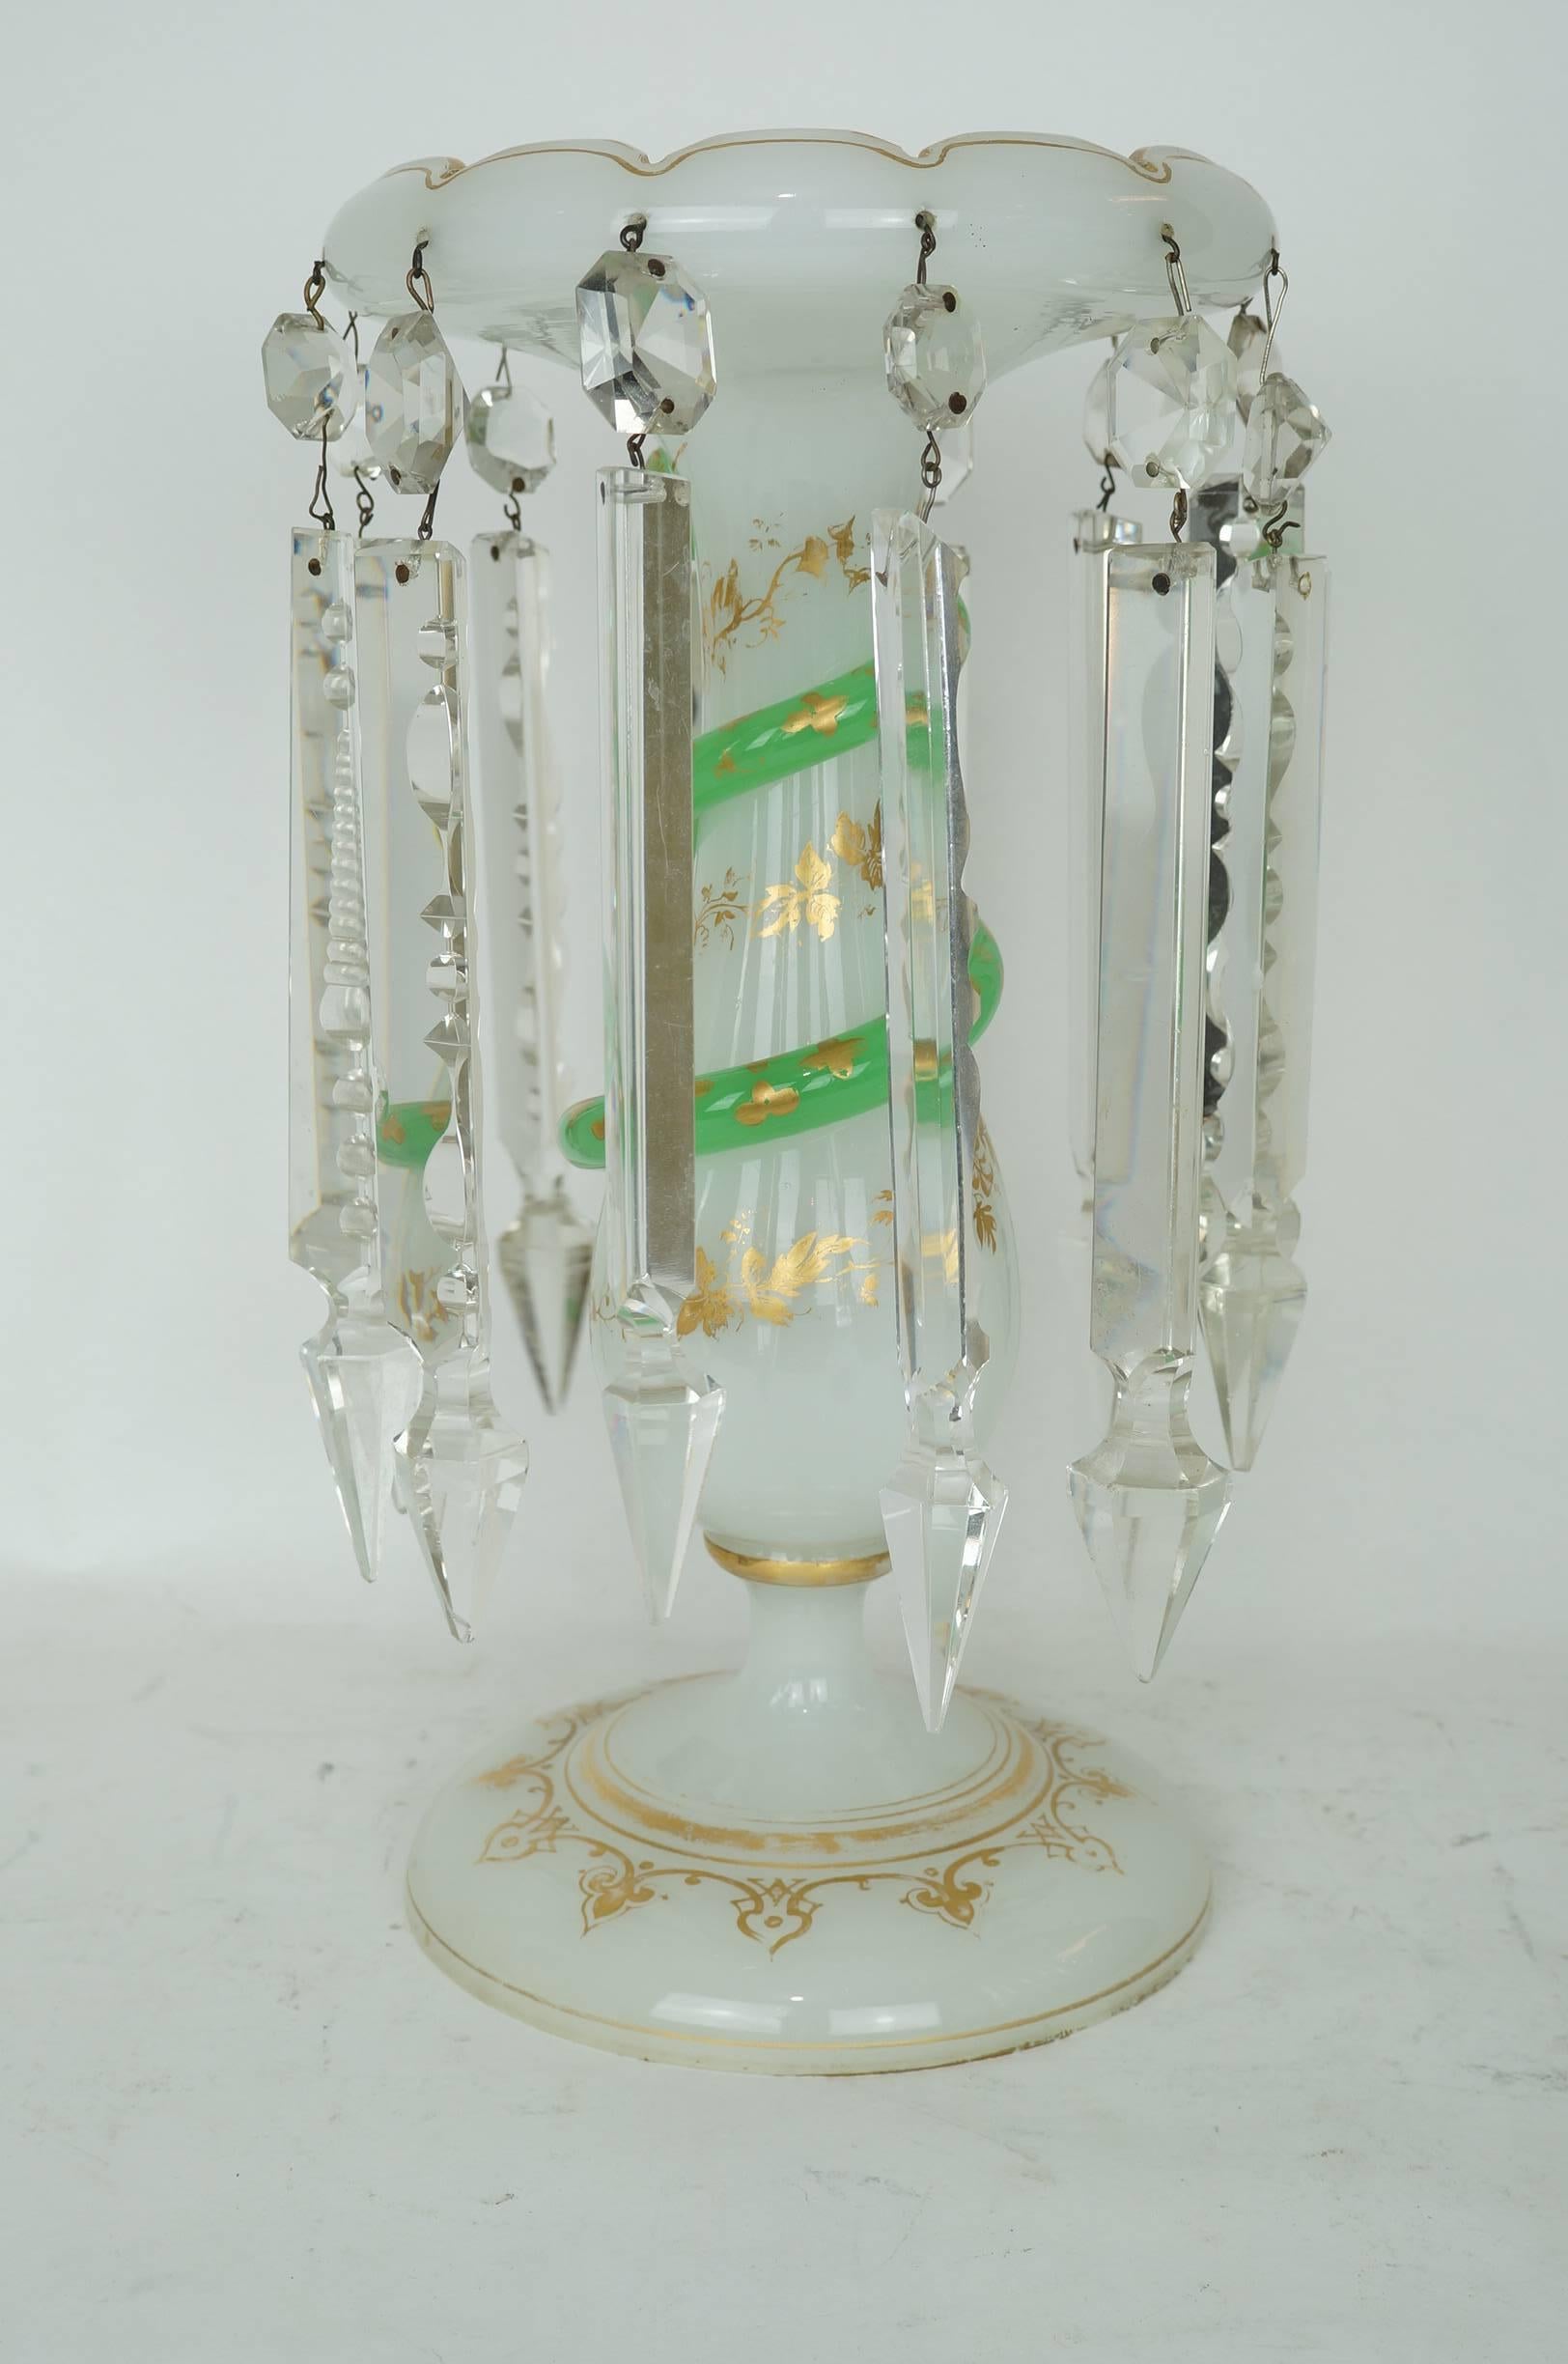 Pair of Beige and Green Opaline Luster Candleholders with Snake Twisted on Stem with Hanging Cut Prisms
Stock Number: DA111